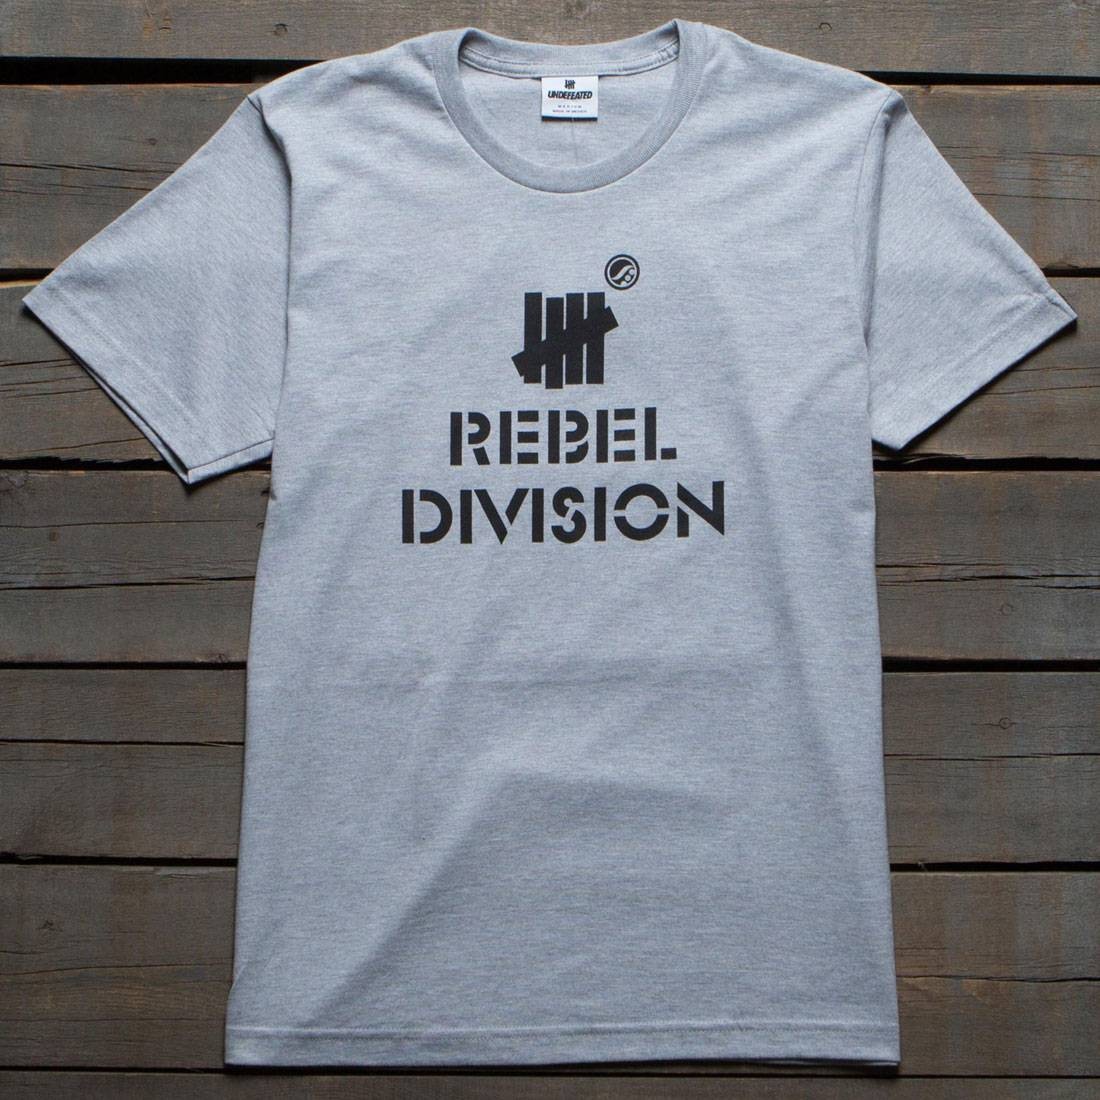 Undefeated x SYR Men Rebel Division Tee (gray / heather)